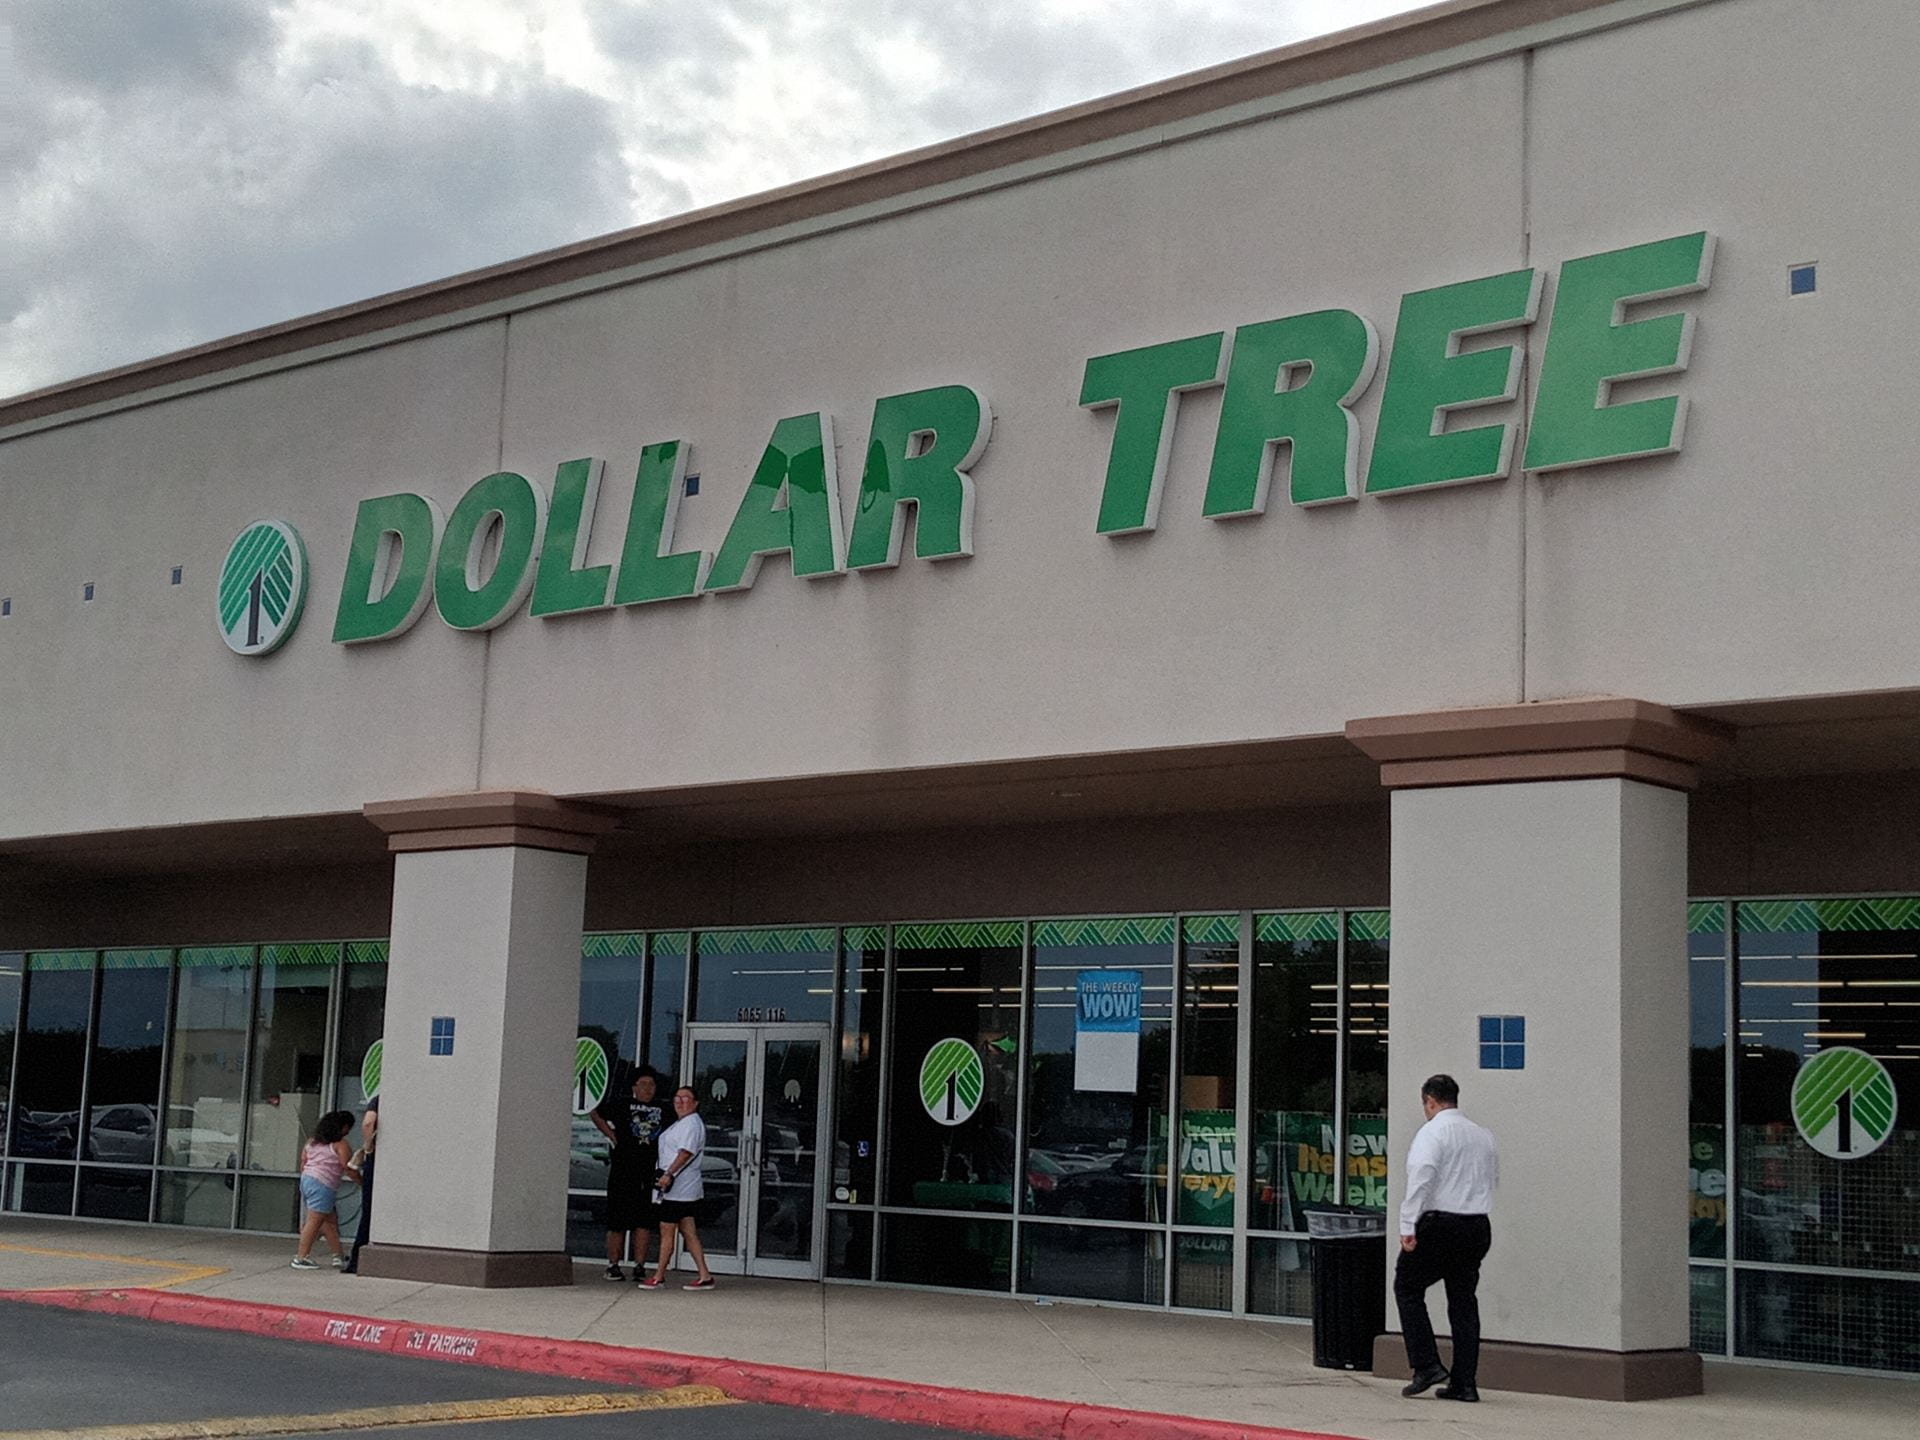 outside of Dollar Tree store